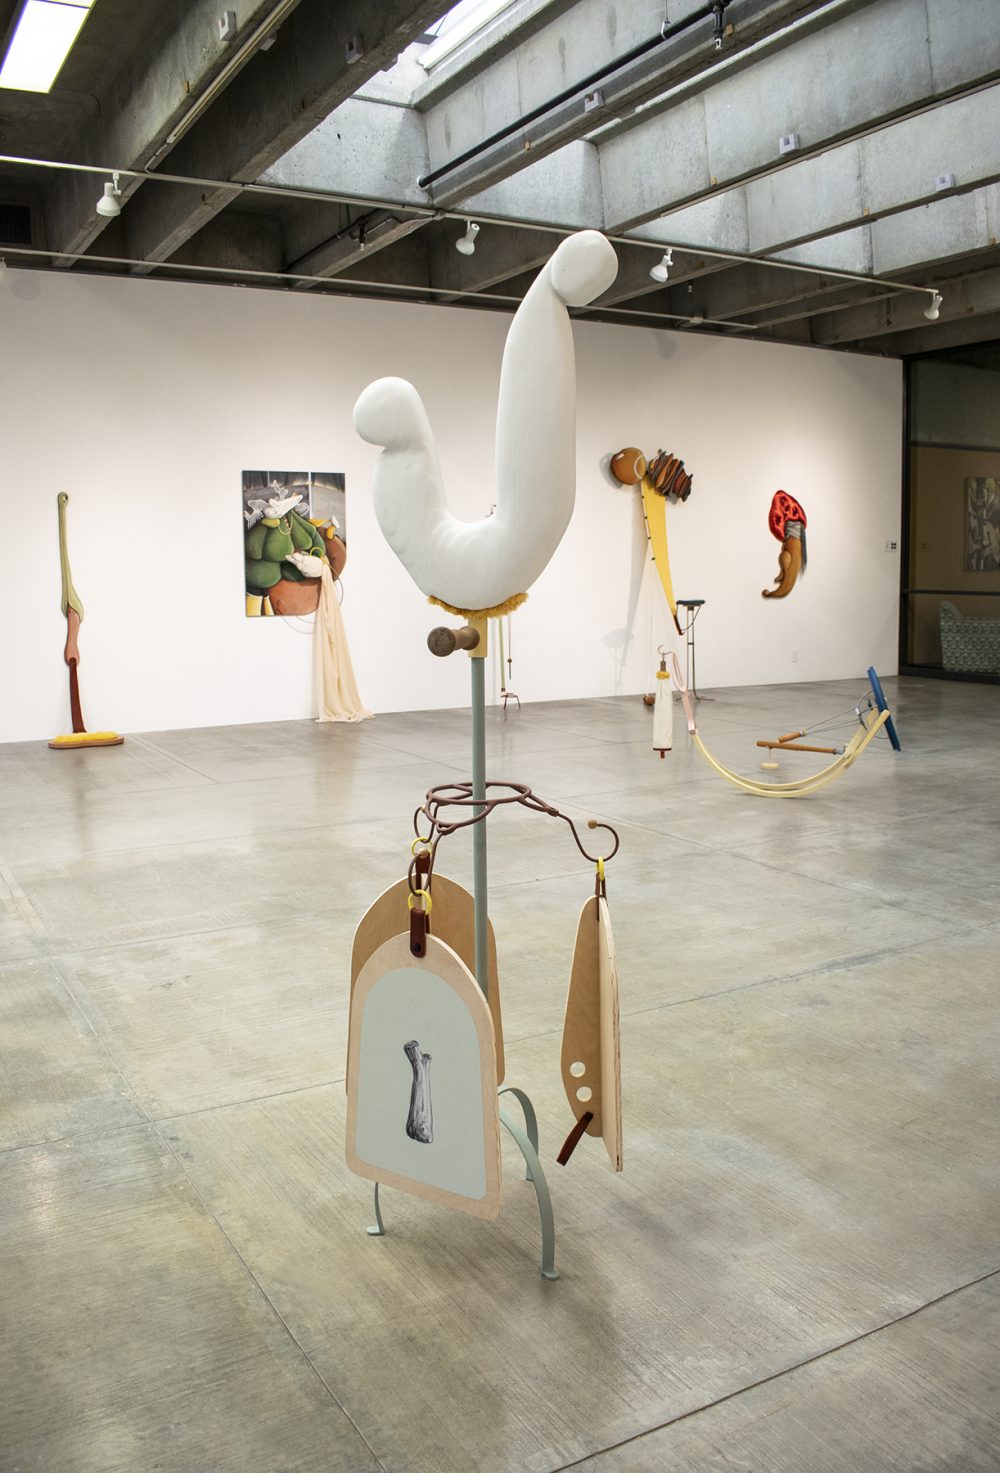 Installation view of exhibition shows large scale mixed media sculptures on the floor and wall of the gallery. Four wall mounted artworks are in the background, and on the right in the middle of the floor is an artwork that is close to the ground and made of bent metal, appearing as though it may rock. In the foreground is a tall sculpture with a central pipe from which hang three wooden paddle shapes with paintings on then. The piece stands on three metal legs, and at the top of the artwork is a white form in the shape of a "J" that is made of stuffed fabric. All the works are abstract and multicolored.